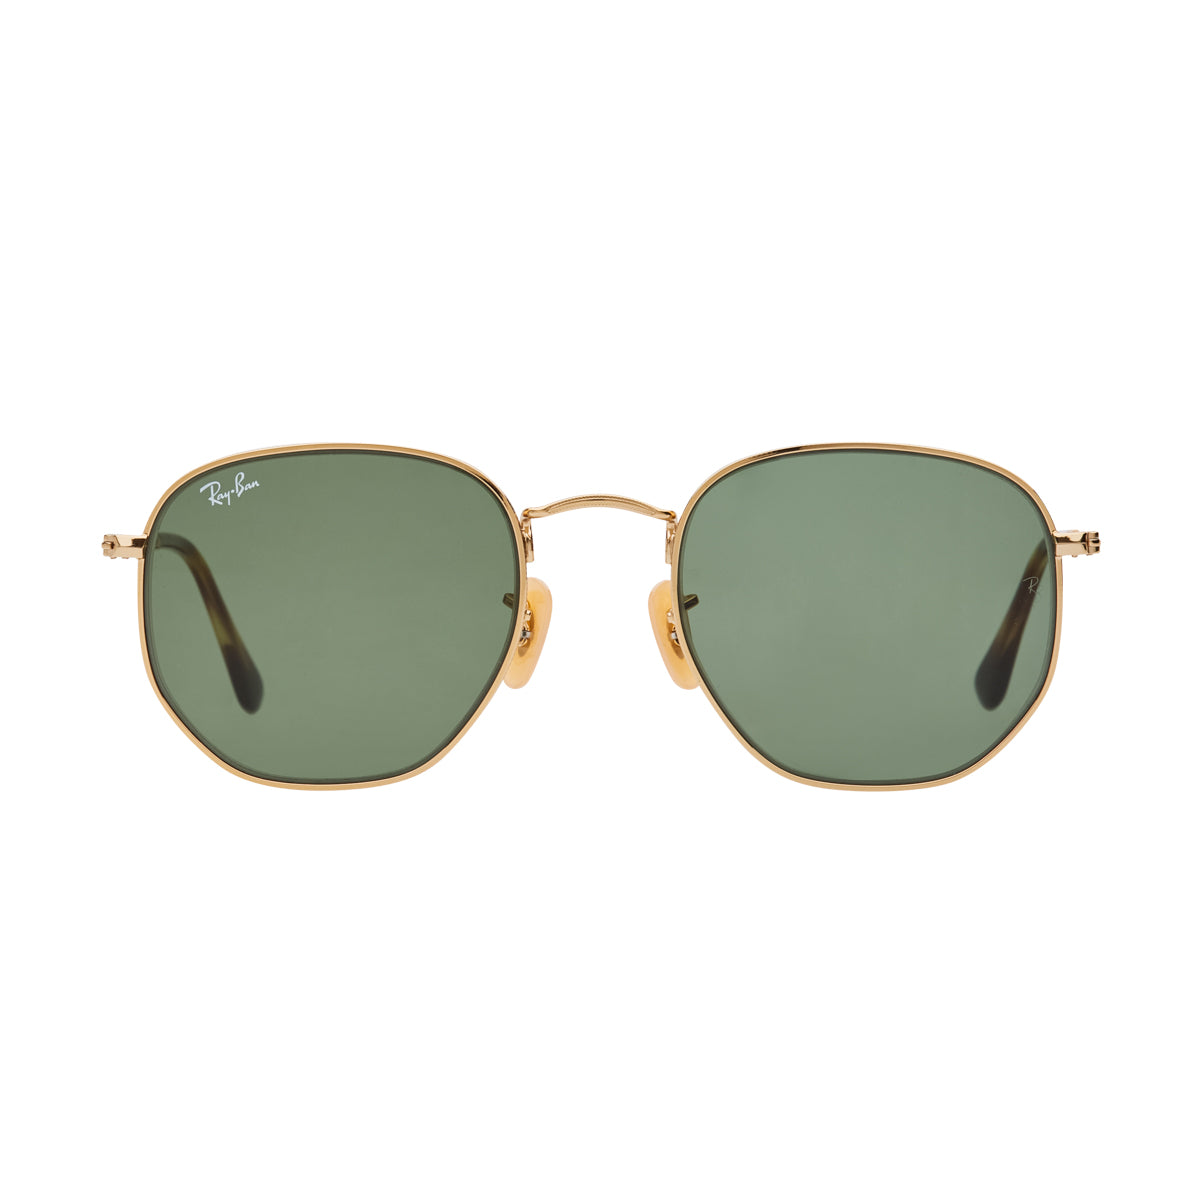 Ray-Ban Hexagonal RB3548N Sunglasses - Gold/Green Front